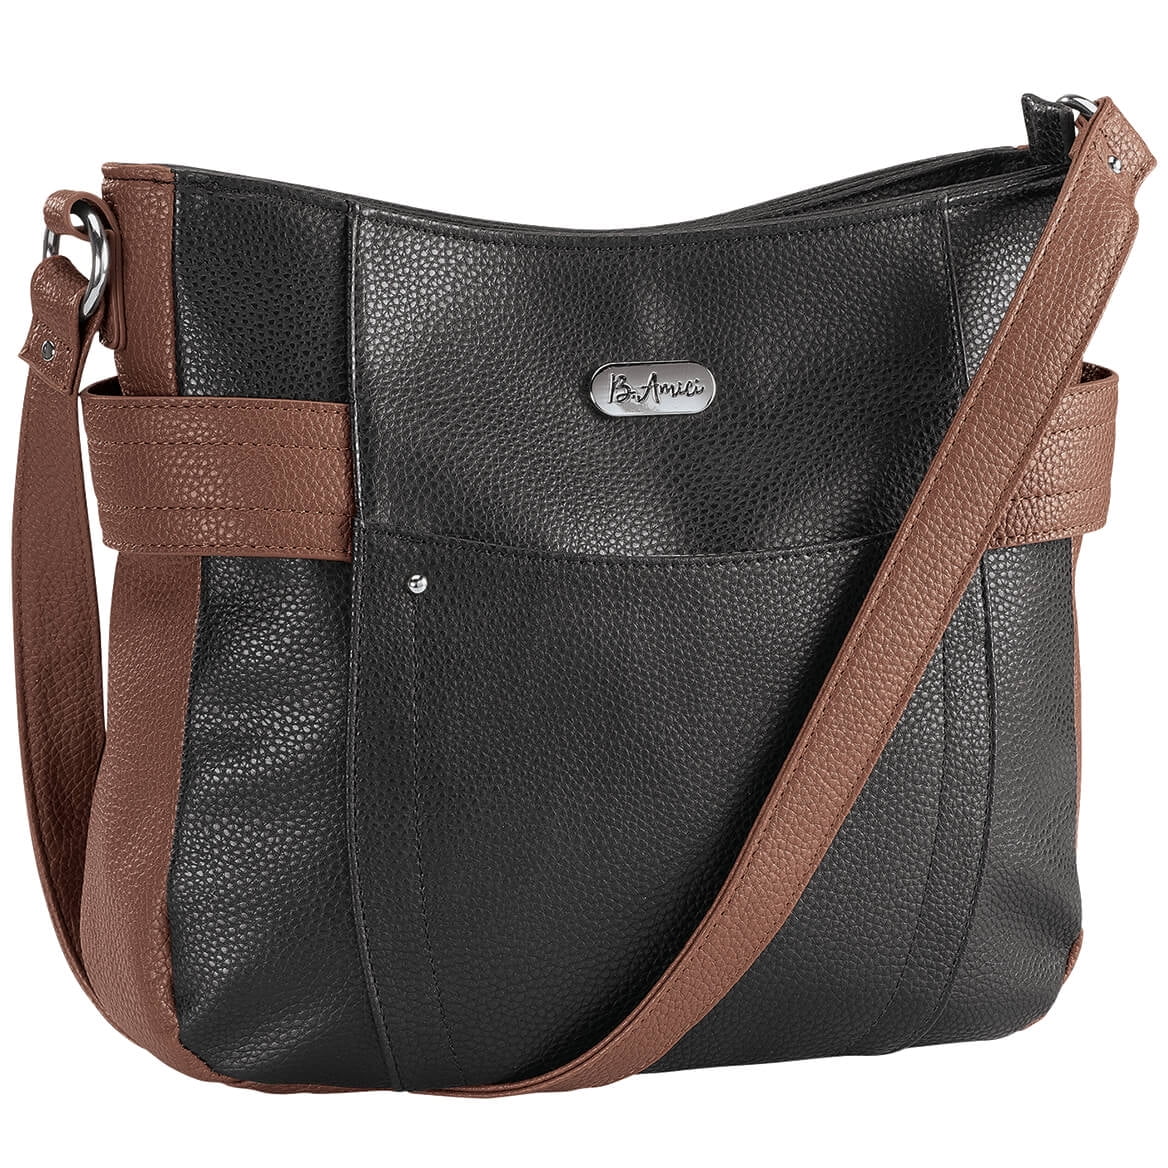 Crossbody Bags and Shoulder Bags for Men - The collection on Mylilly